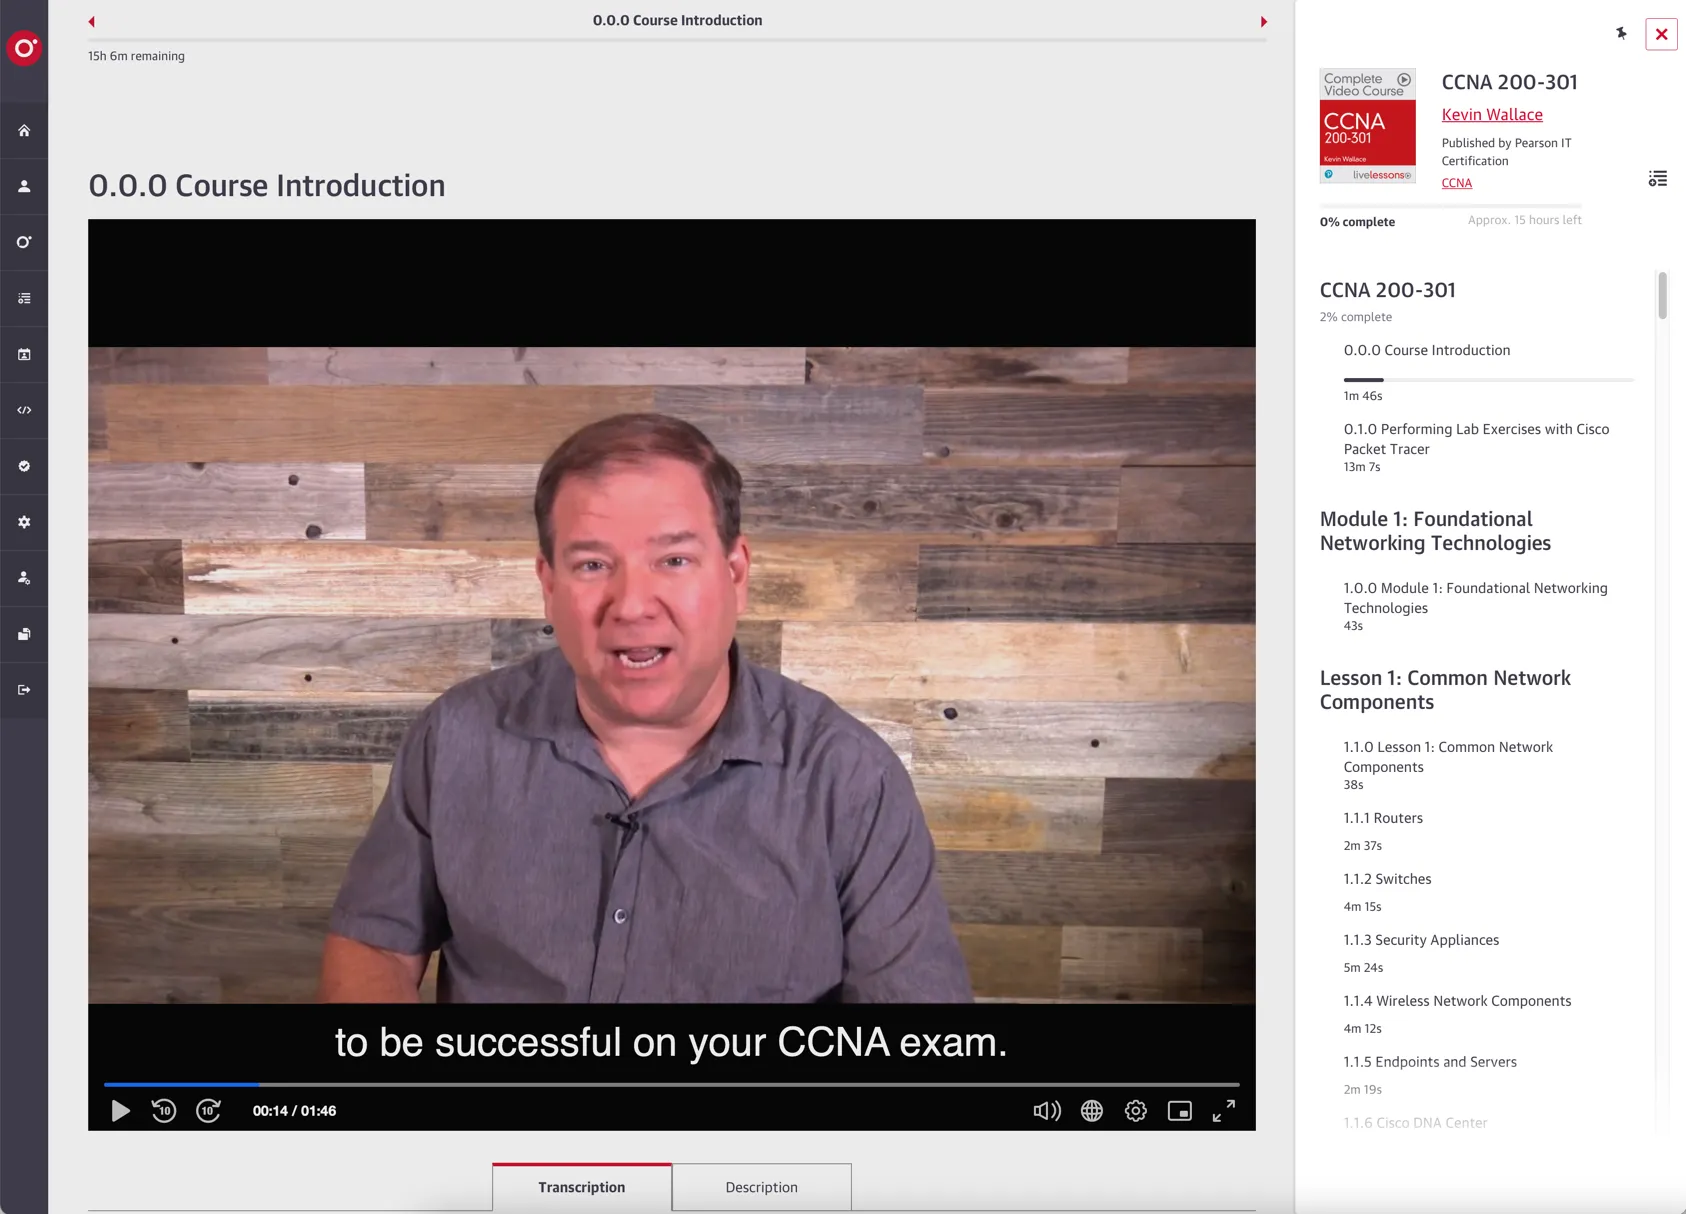 CCNA 200-301 Complete Video Course by Kevin Wallace - Safari Books Online Screenshot